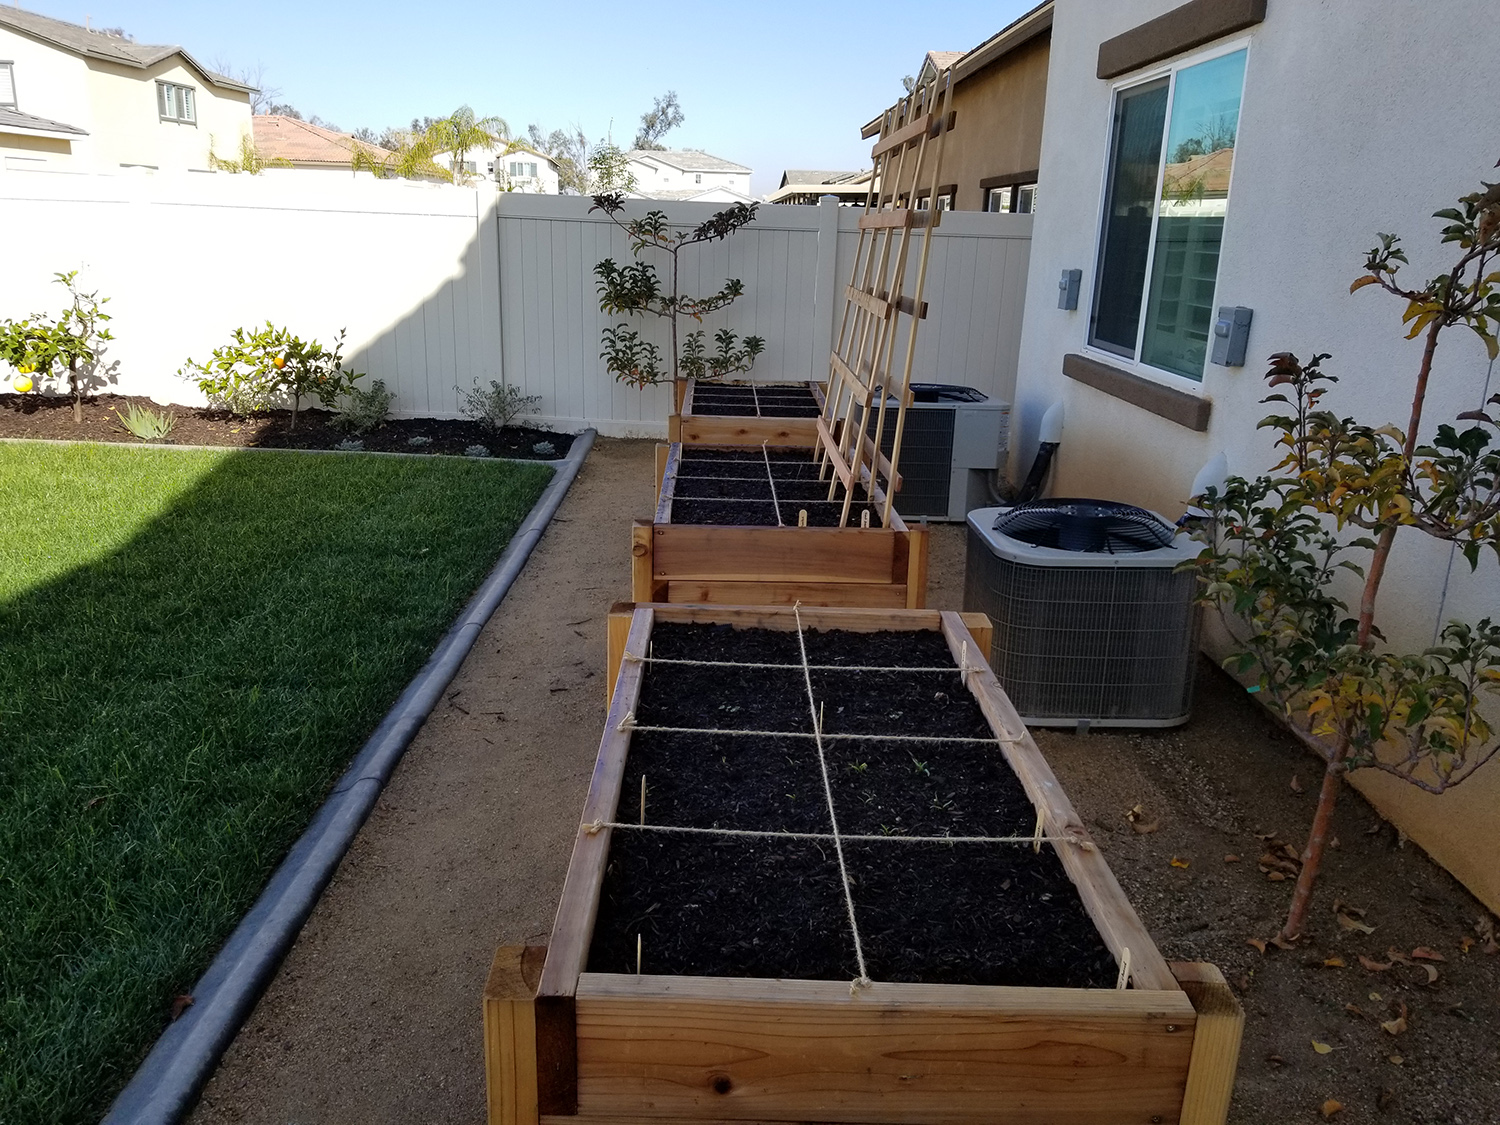 Grass and planter boxes